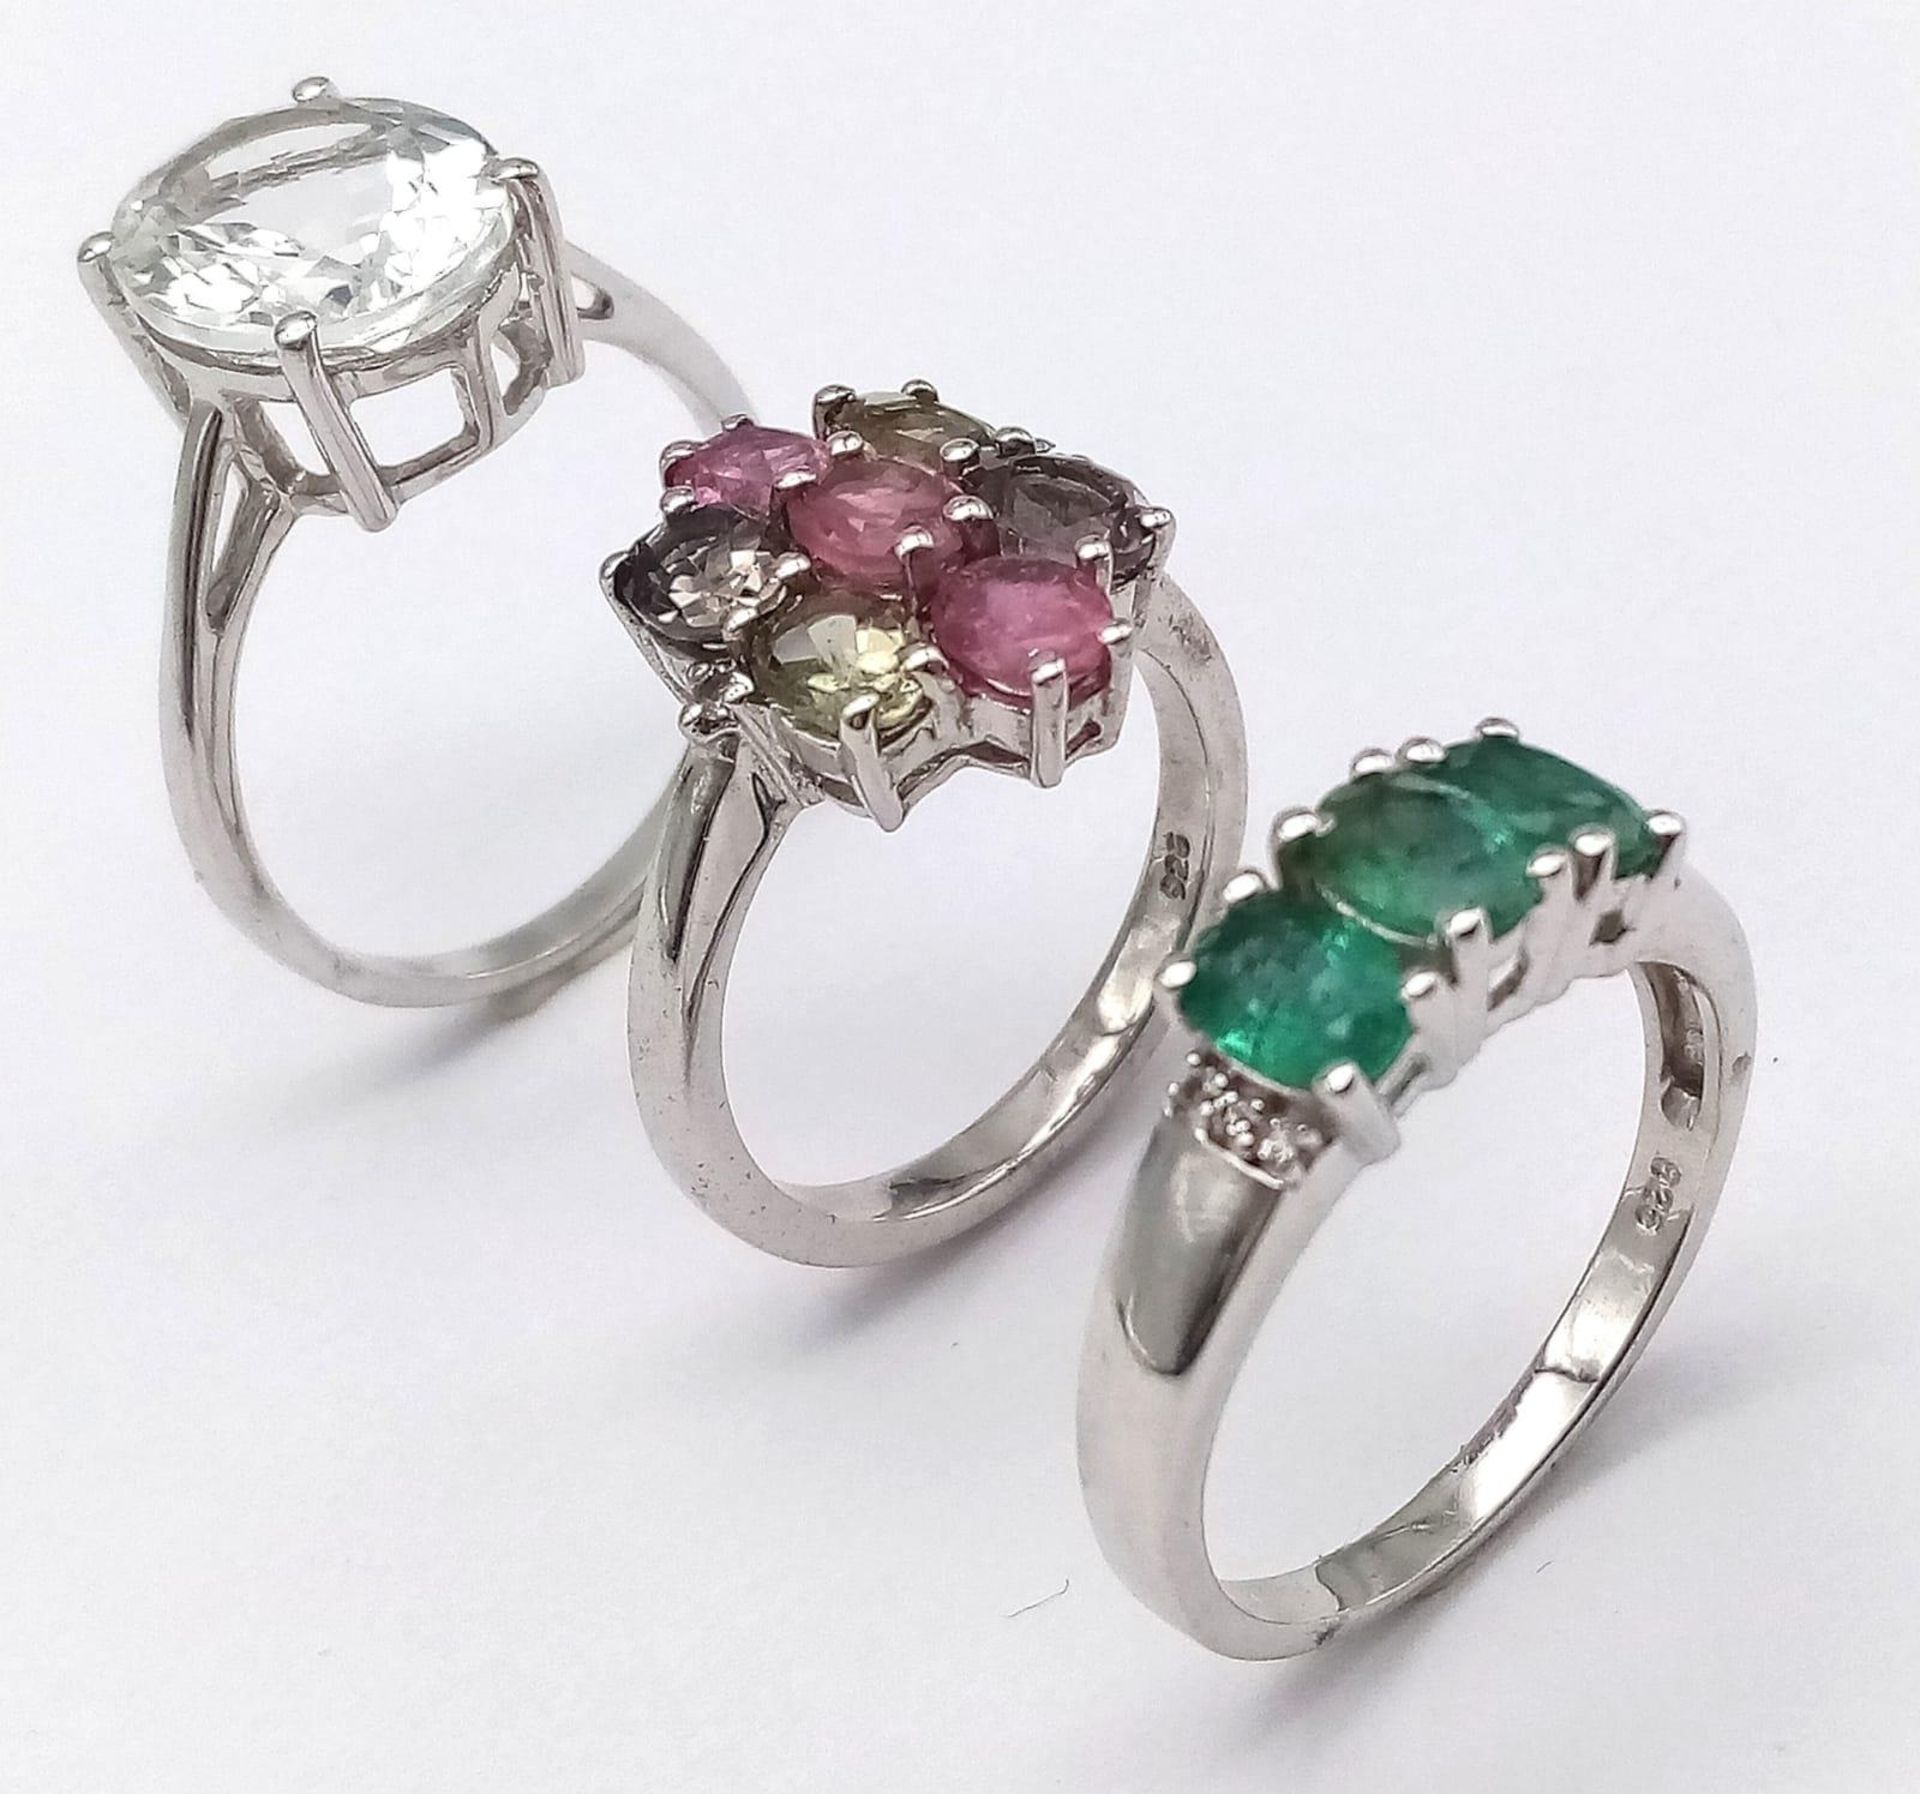 Three 925 Sterling Silver Gemstone Rings: Tourmaline - Size N, Topaz - Size S and Emerald - Size P.